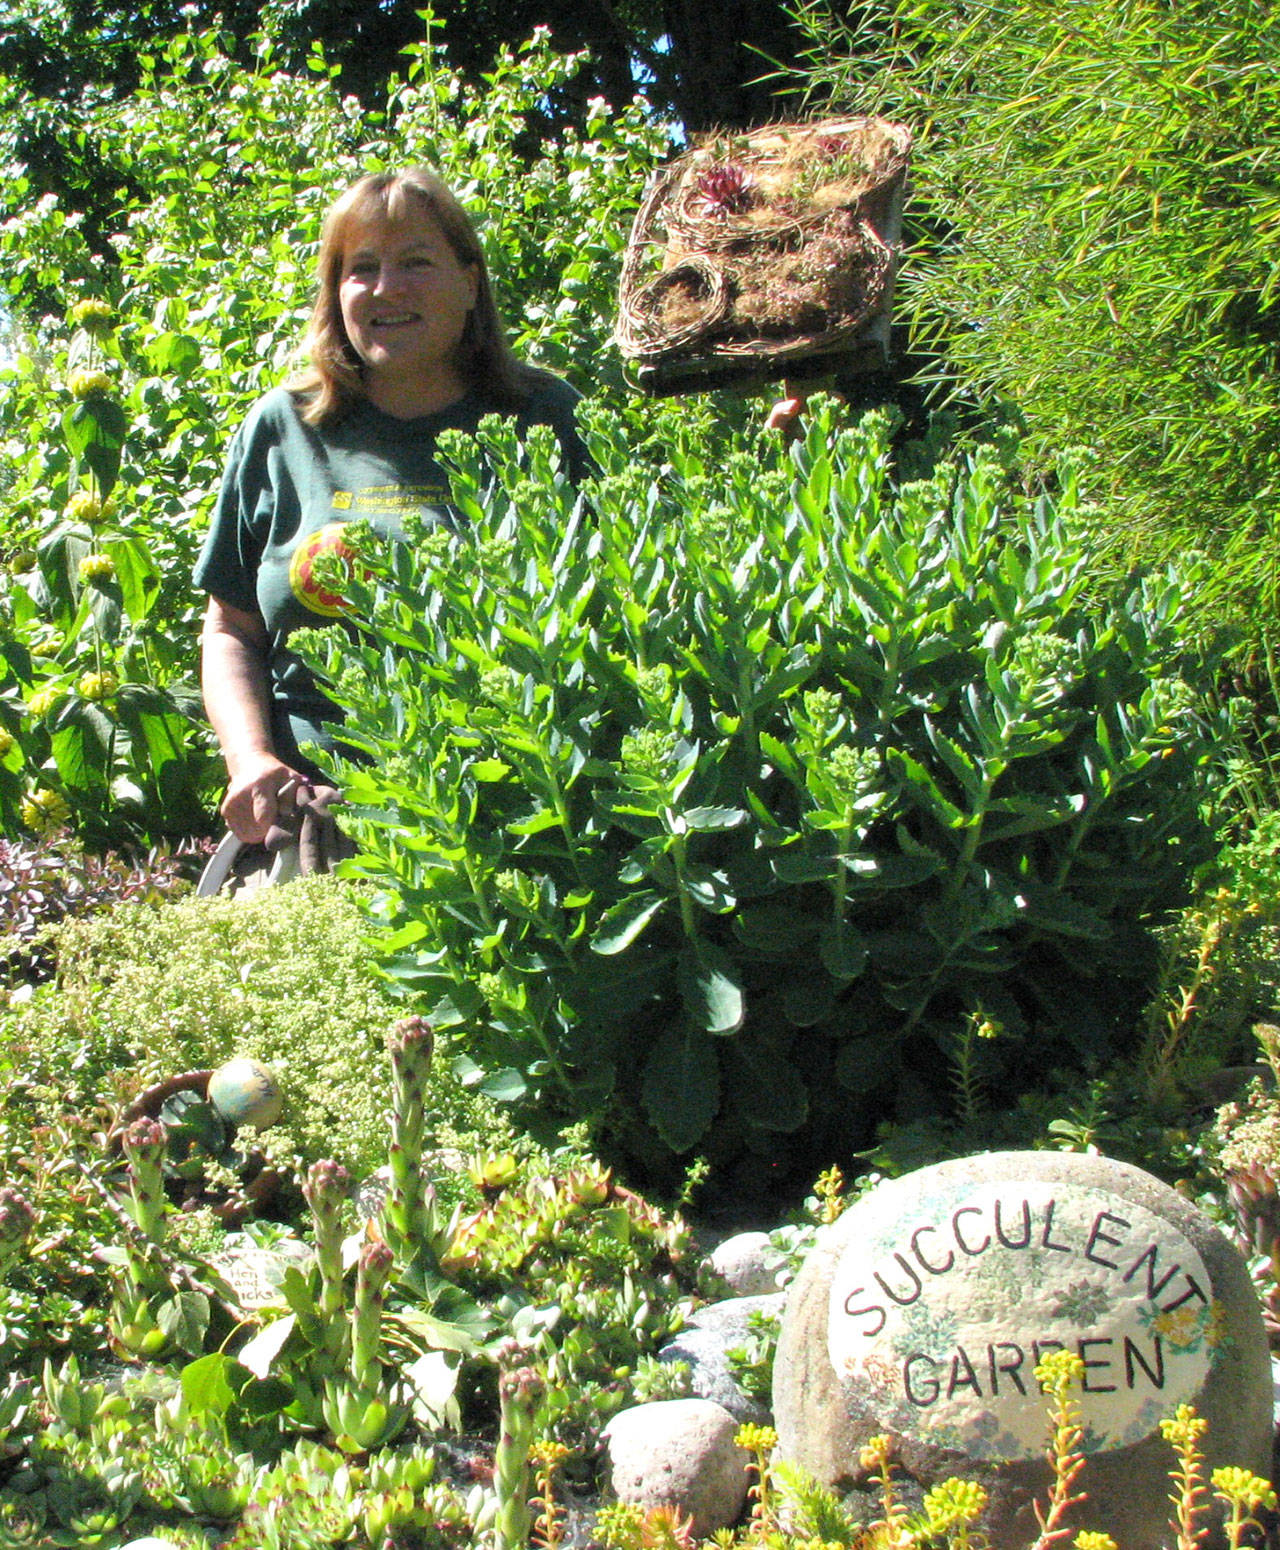 Learn about hardy succulents from an expert at Green Thumbs session